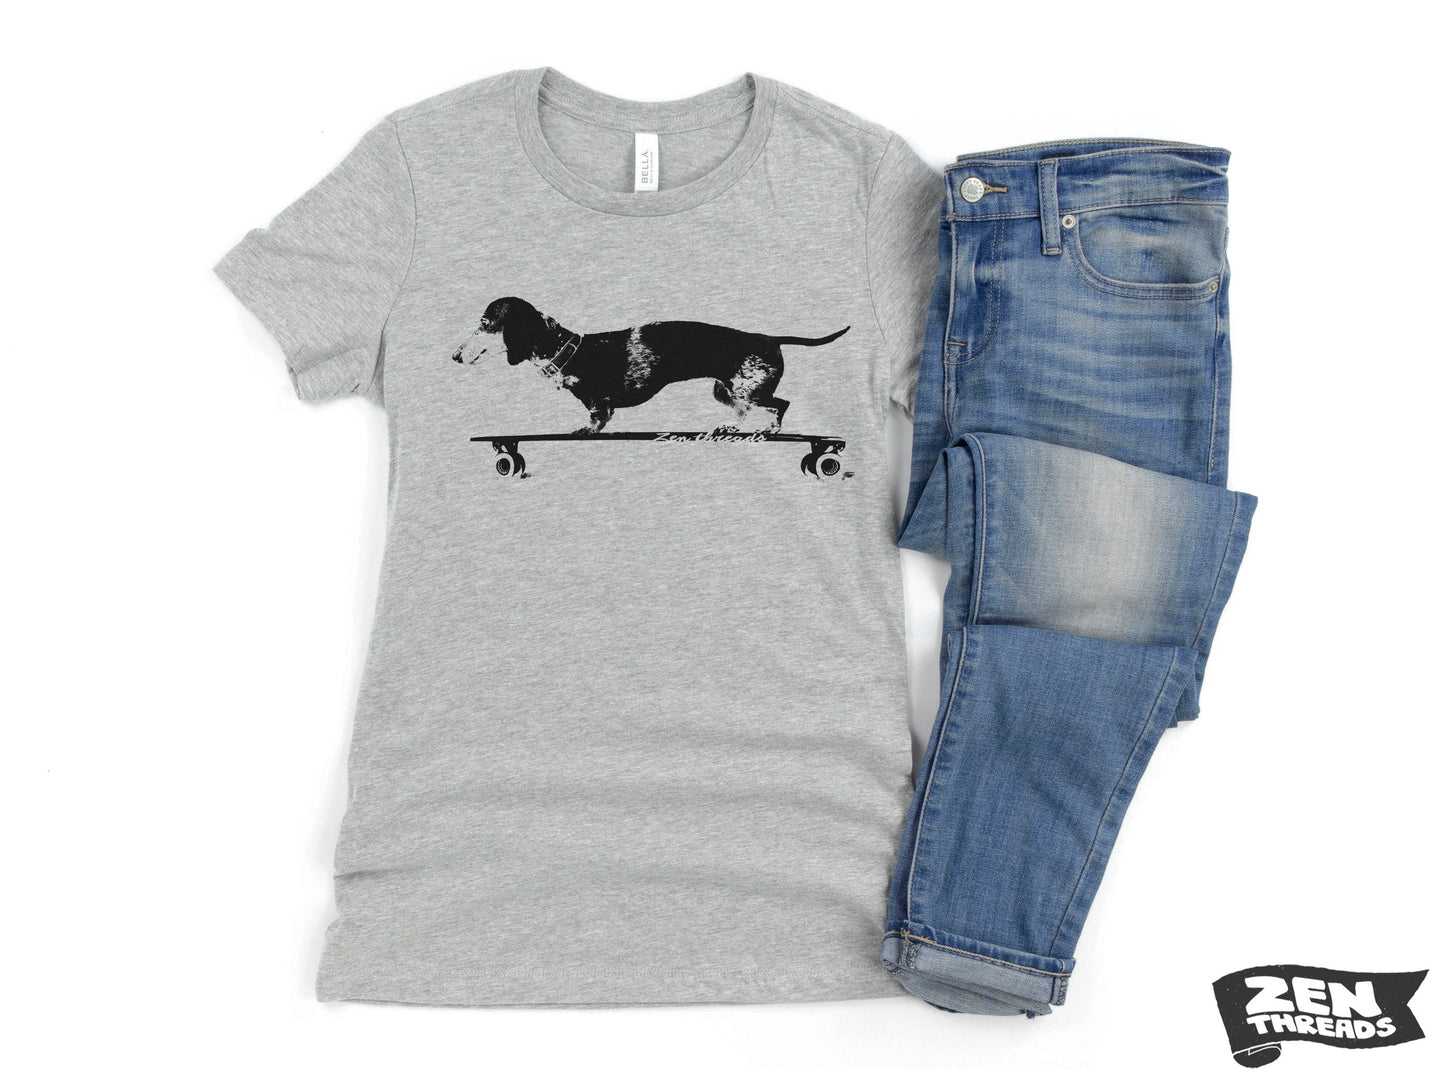 Womens Longboard DACHSHUND T Shirt eco soft printed (+ Colors Available) custom ladies relaxed crew tee doxie dog skating skateboard funny